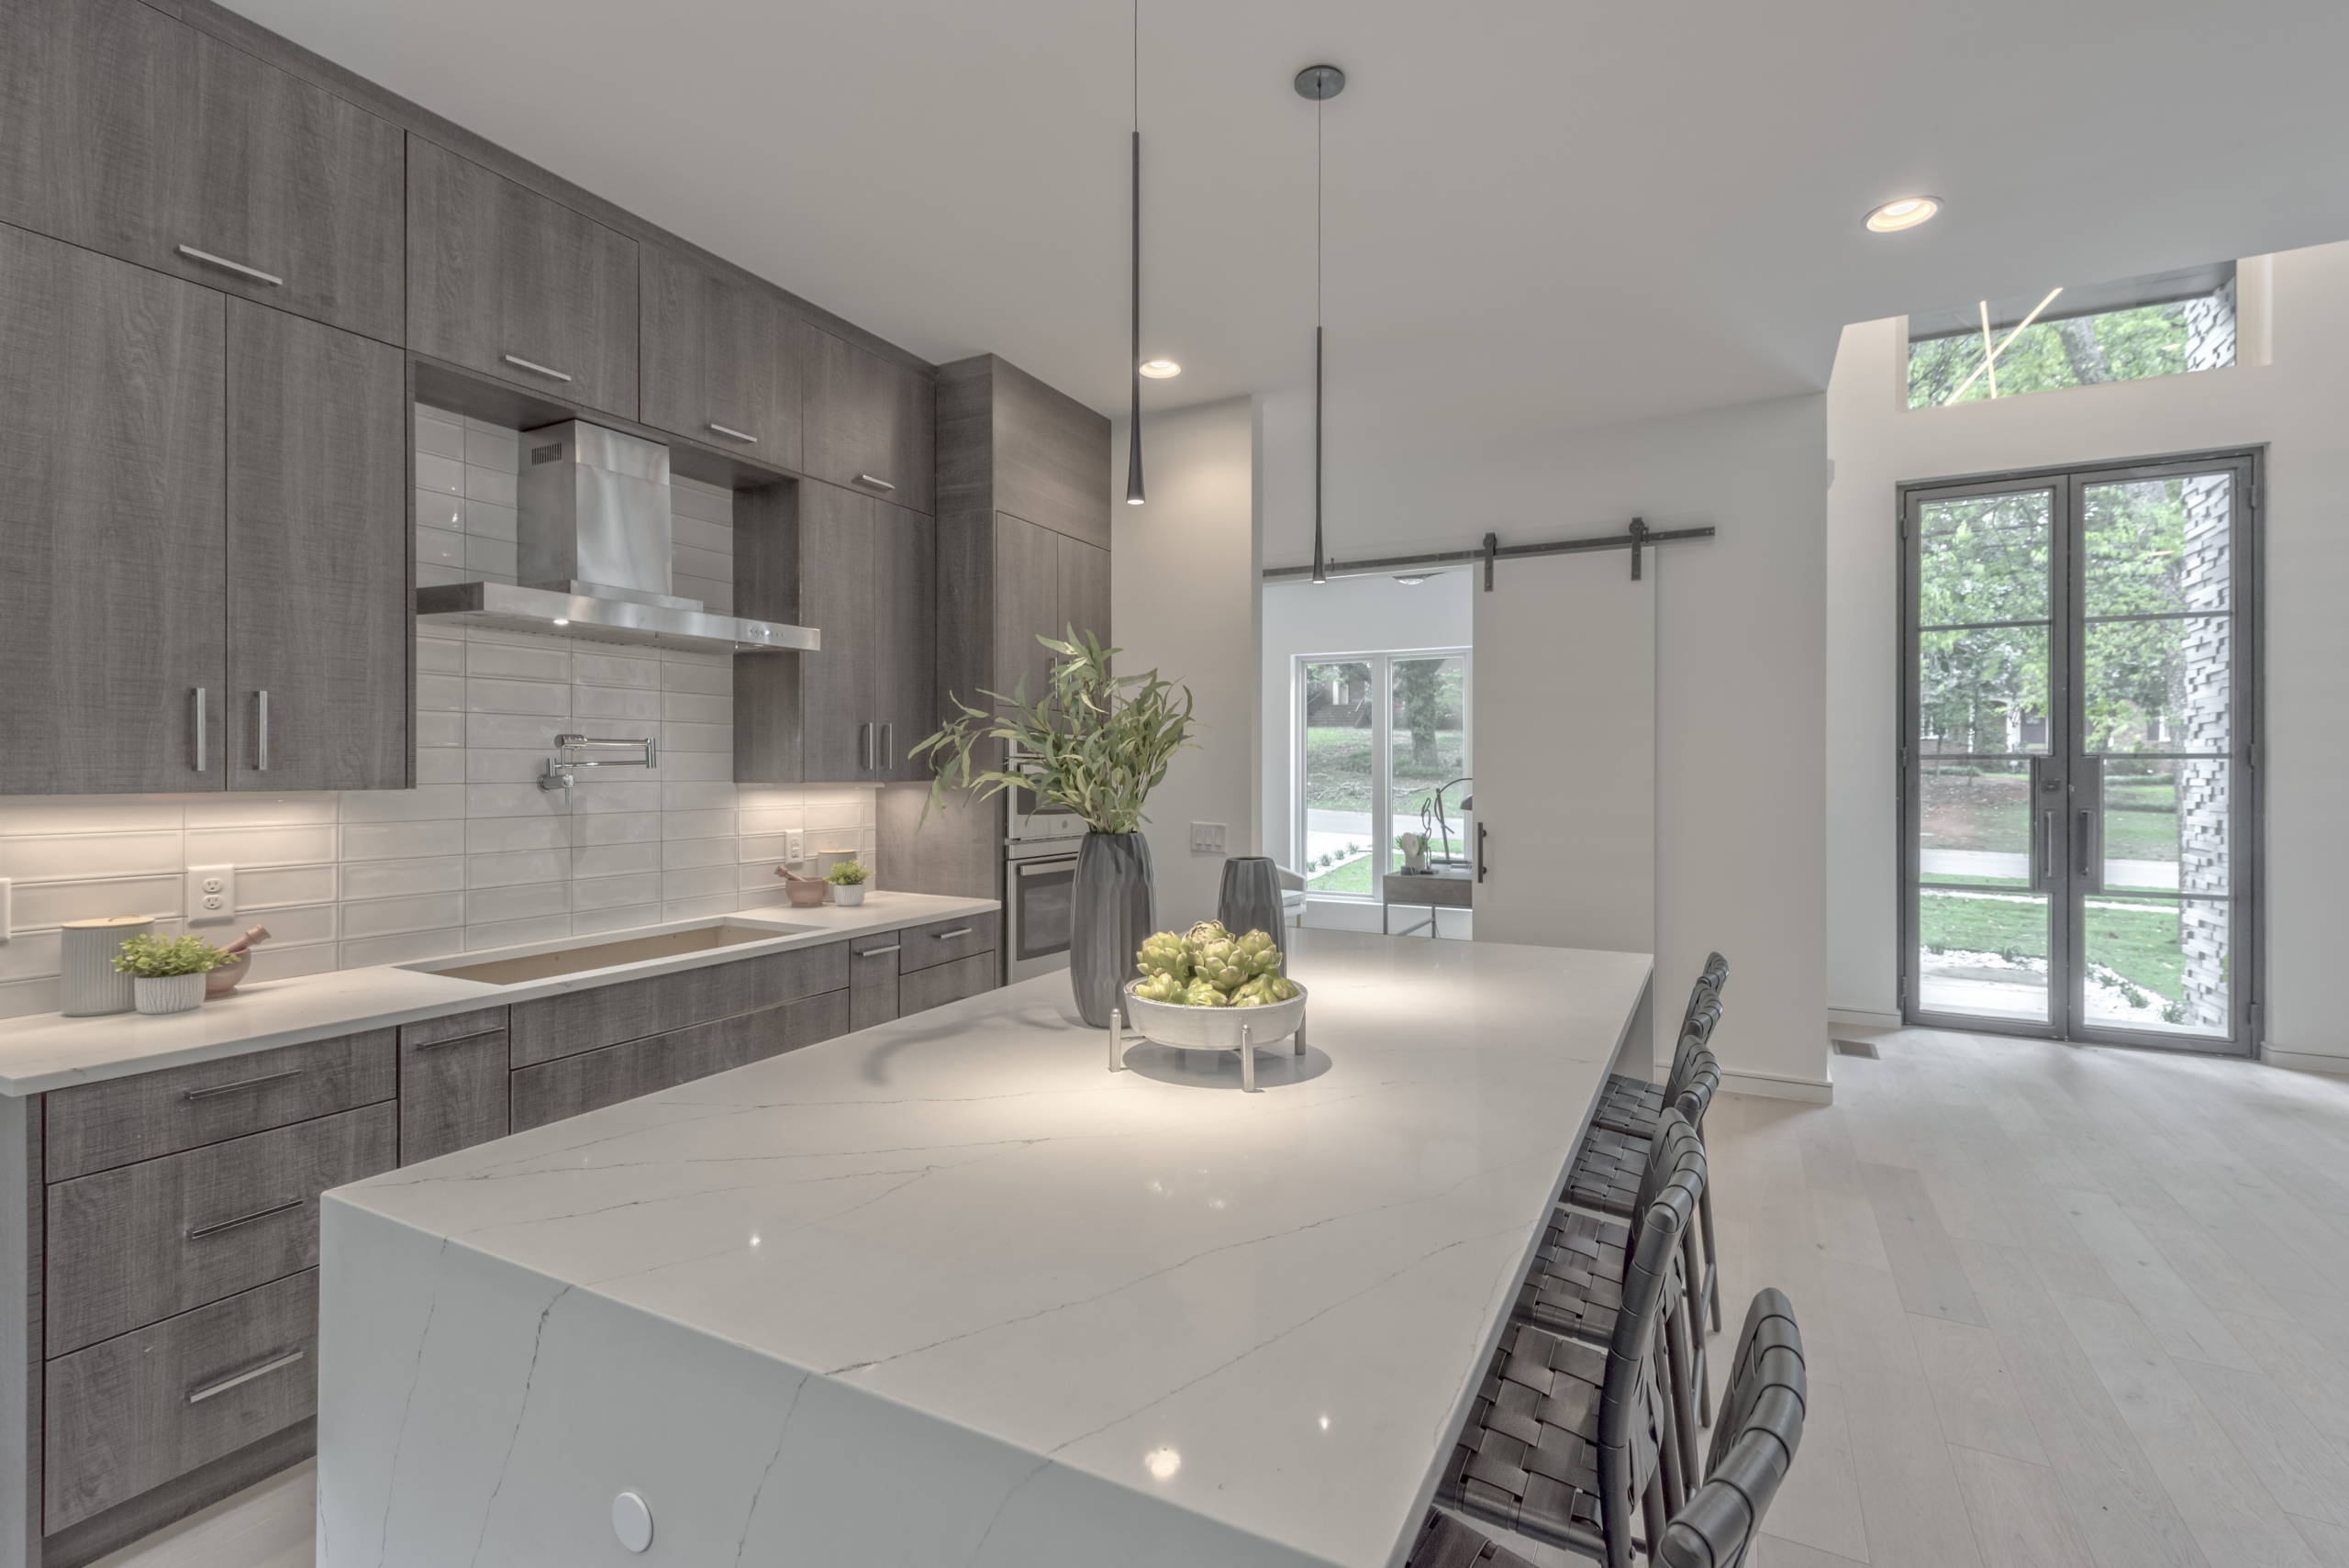 Modern gray and white kitchen with wood box, dove tail drawers, and a farmhouse style sliding double door with subway tile backsplash and huge windows into forest. White marble countertops with a waterfall island